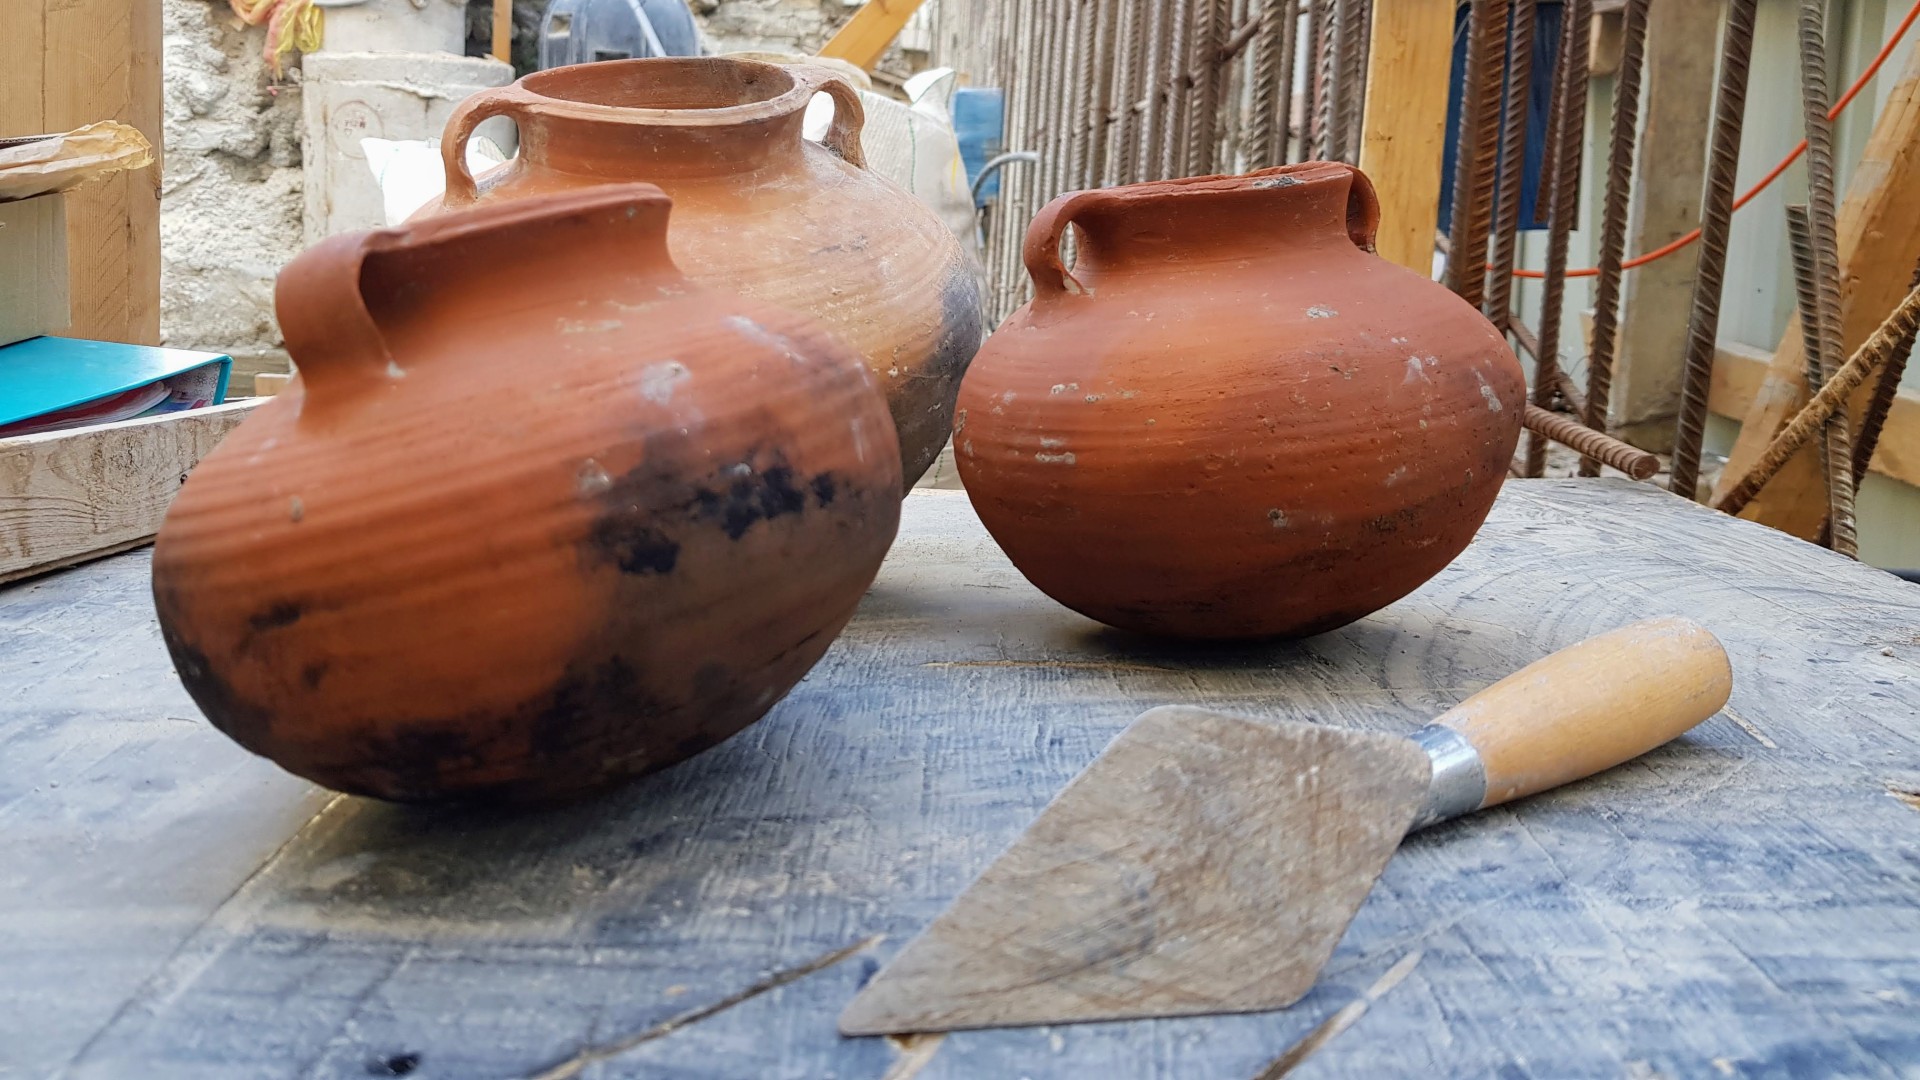 Three intact pottery cooking vessels. They have a bulbous shape with 2 small handles on either side at the top. There is a builder’s trowel in front of them.